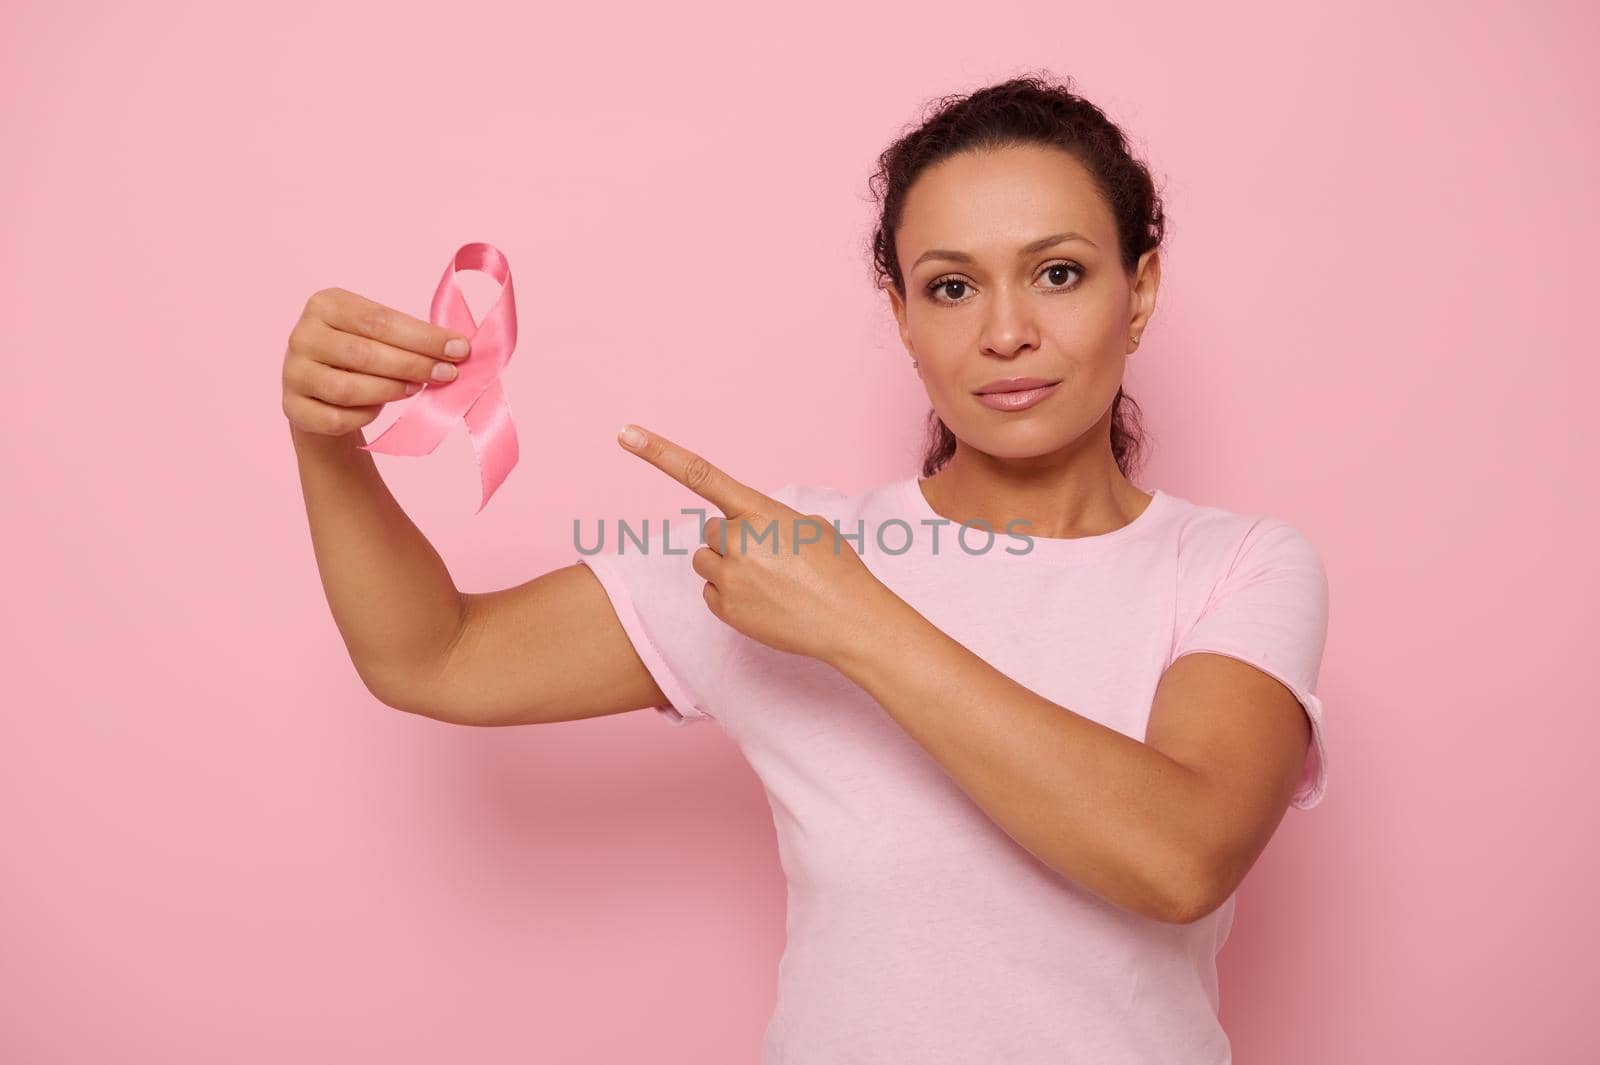 Portrait of serene Middle Eastern ethnicity woman in pink T-shirt pointing to a satin ribbon in her hand, looking at camera, isolated on colored background with copy space. Breast Cancer Day concept by artgf